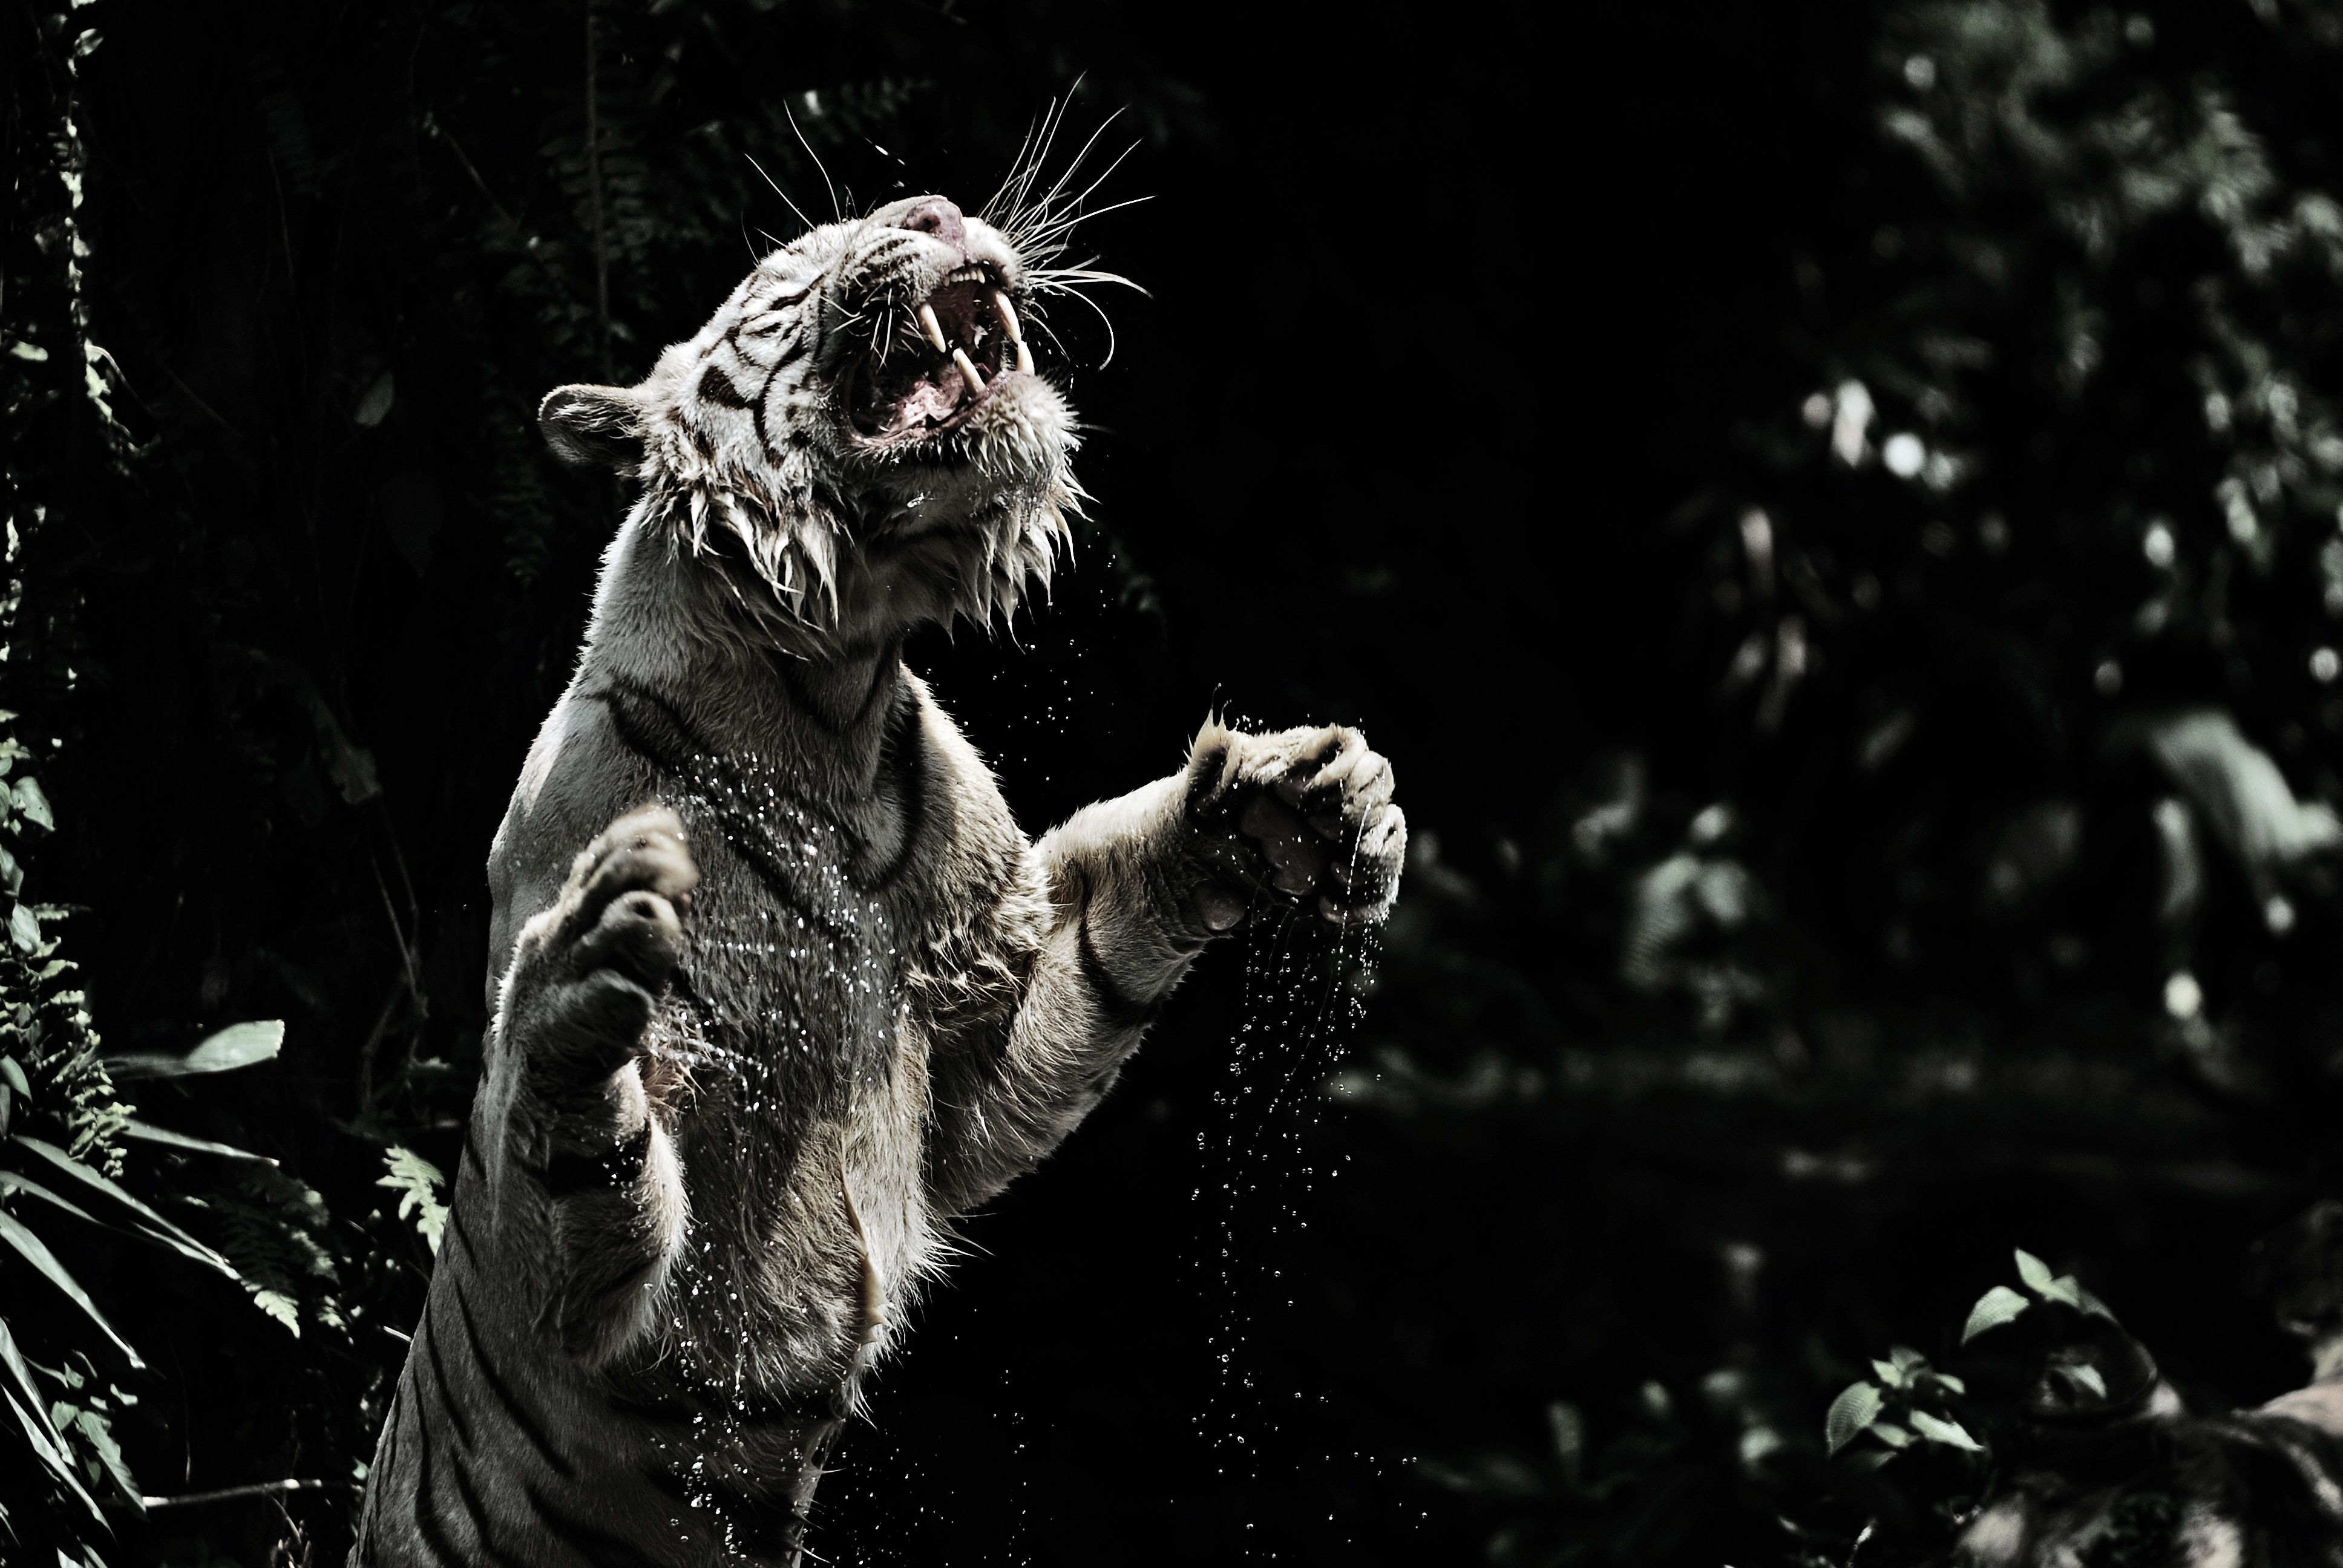 White Tiger 4k Ultra HD Wallpapers